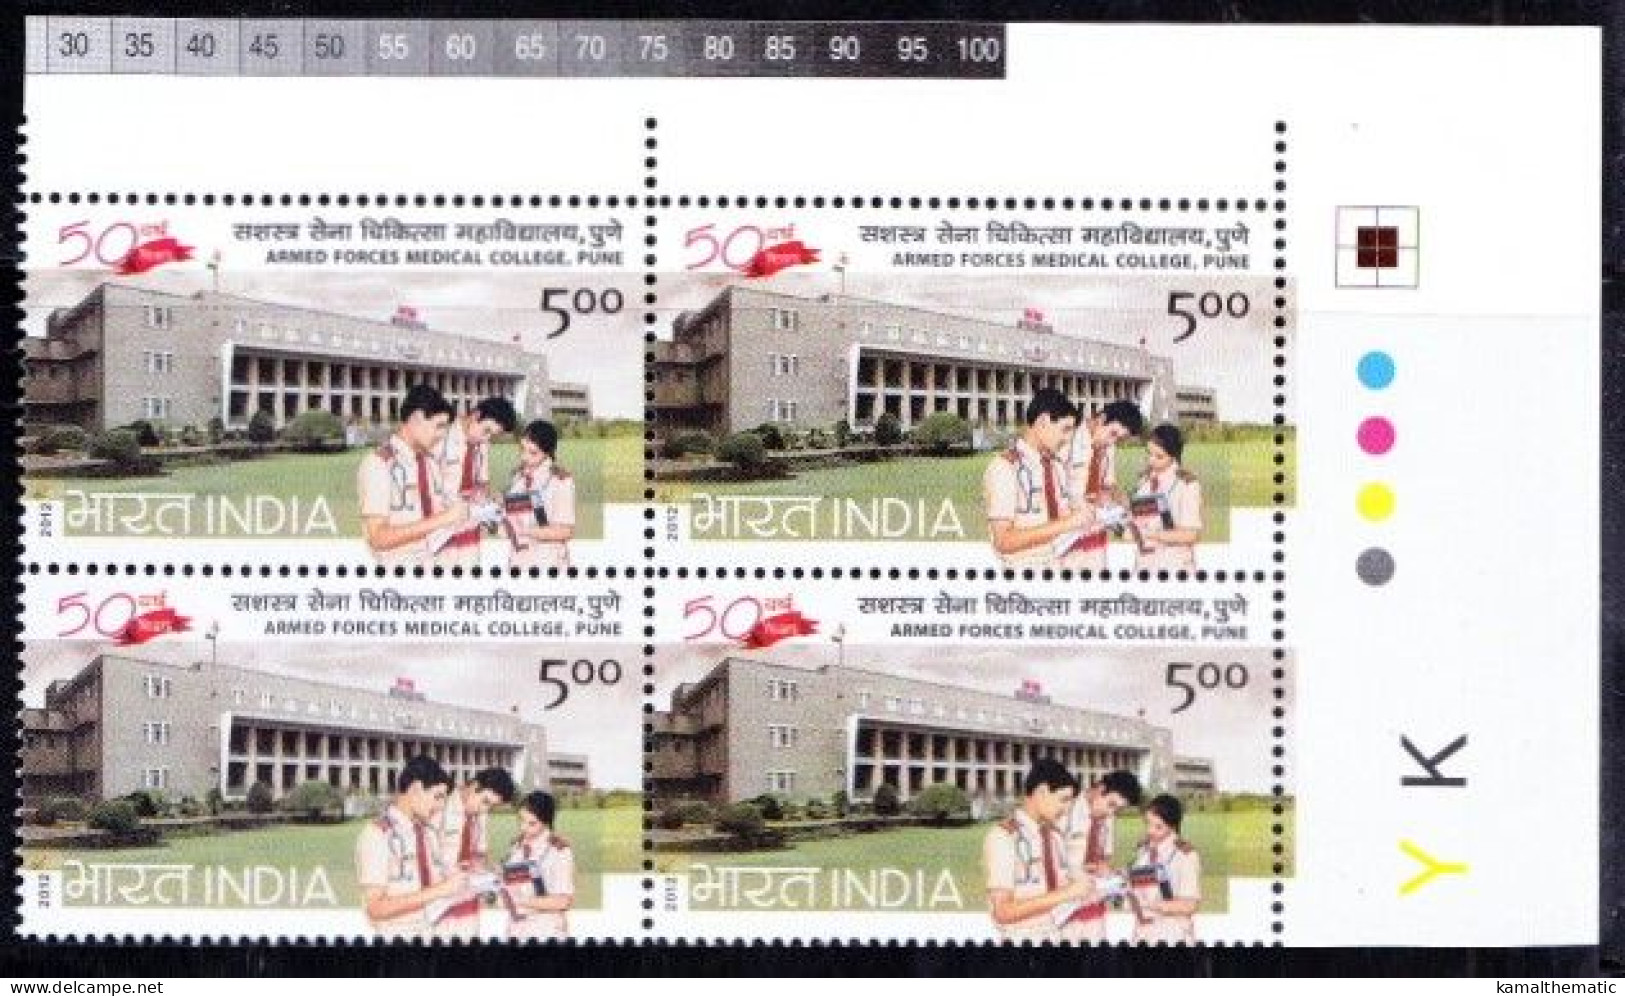 India 2012 MNH Blk 4, Up. Rt, Colour Guide, Armed Forces, Medical College, Stethoscope, - Geneeskunde